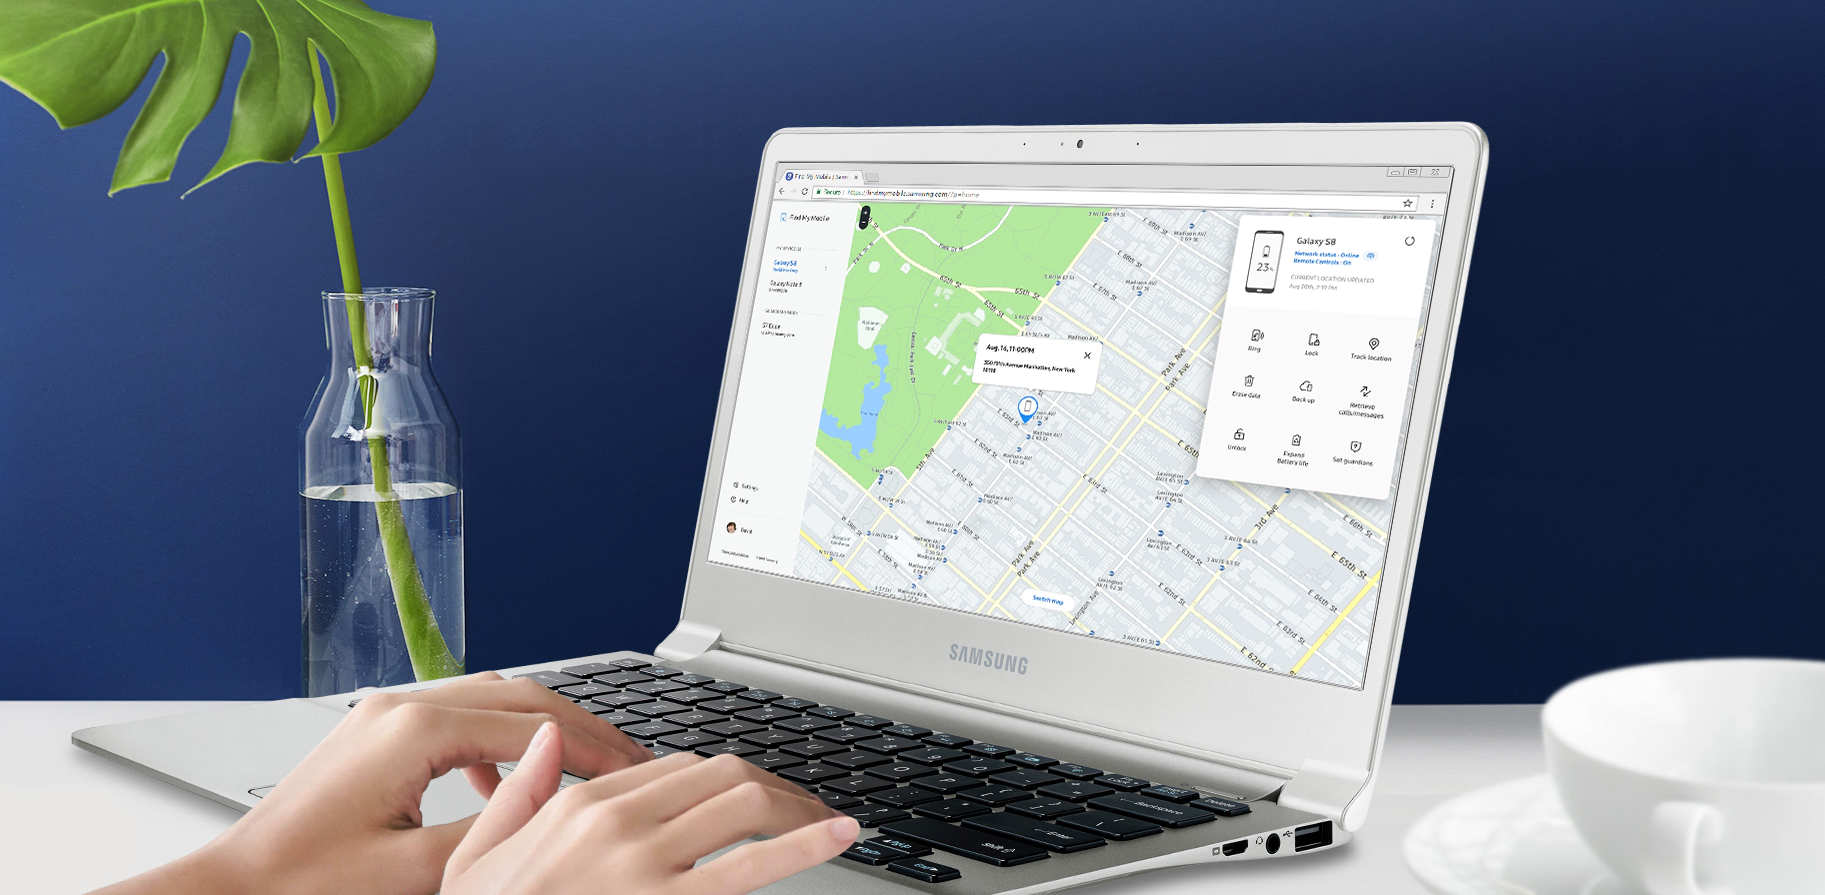 Samsung Find My Phone Device Apps on Laptop